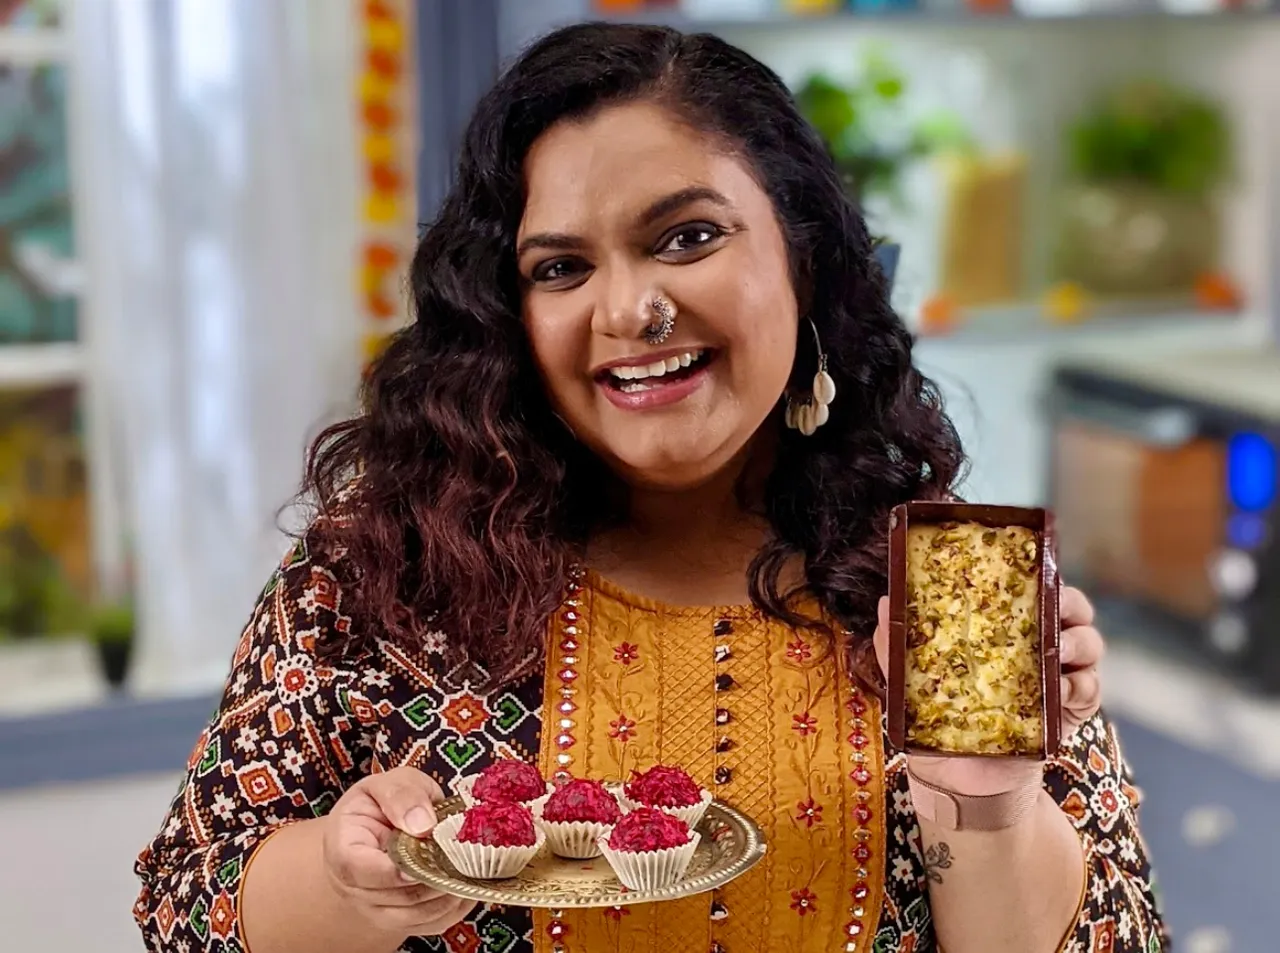 Celebrate this Eid with desserty delights indulging with Aditi Gaware's Ramzan recipes!